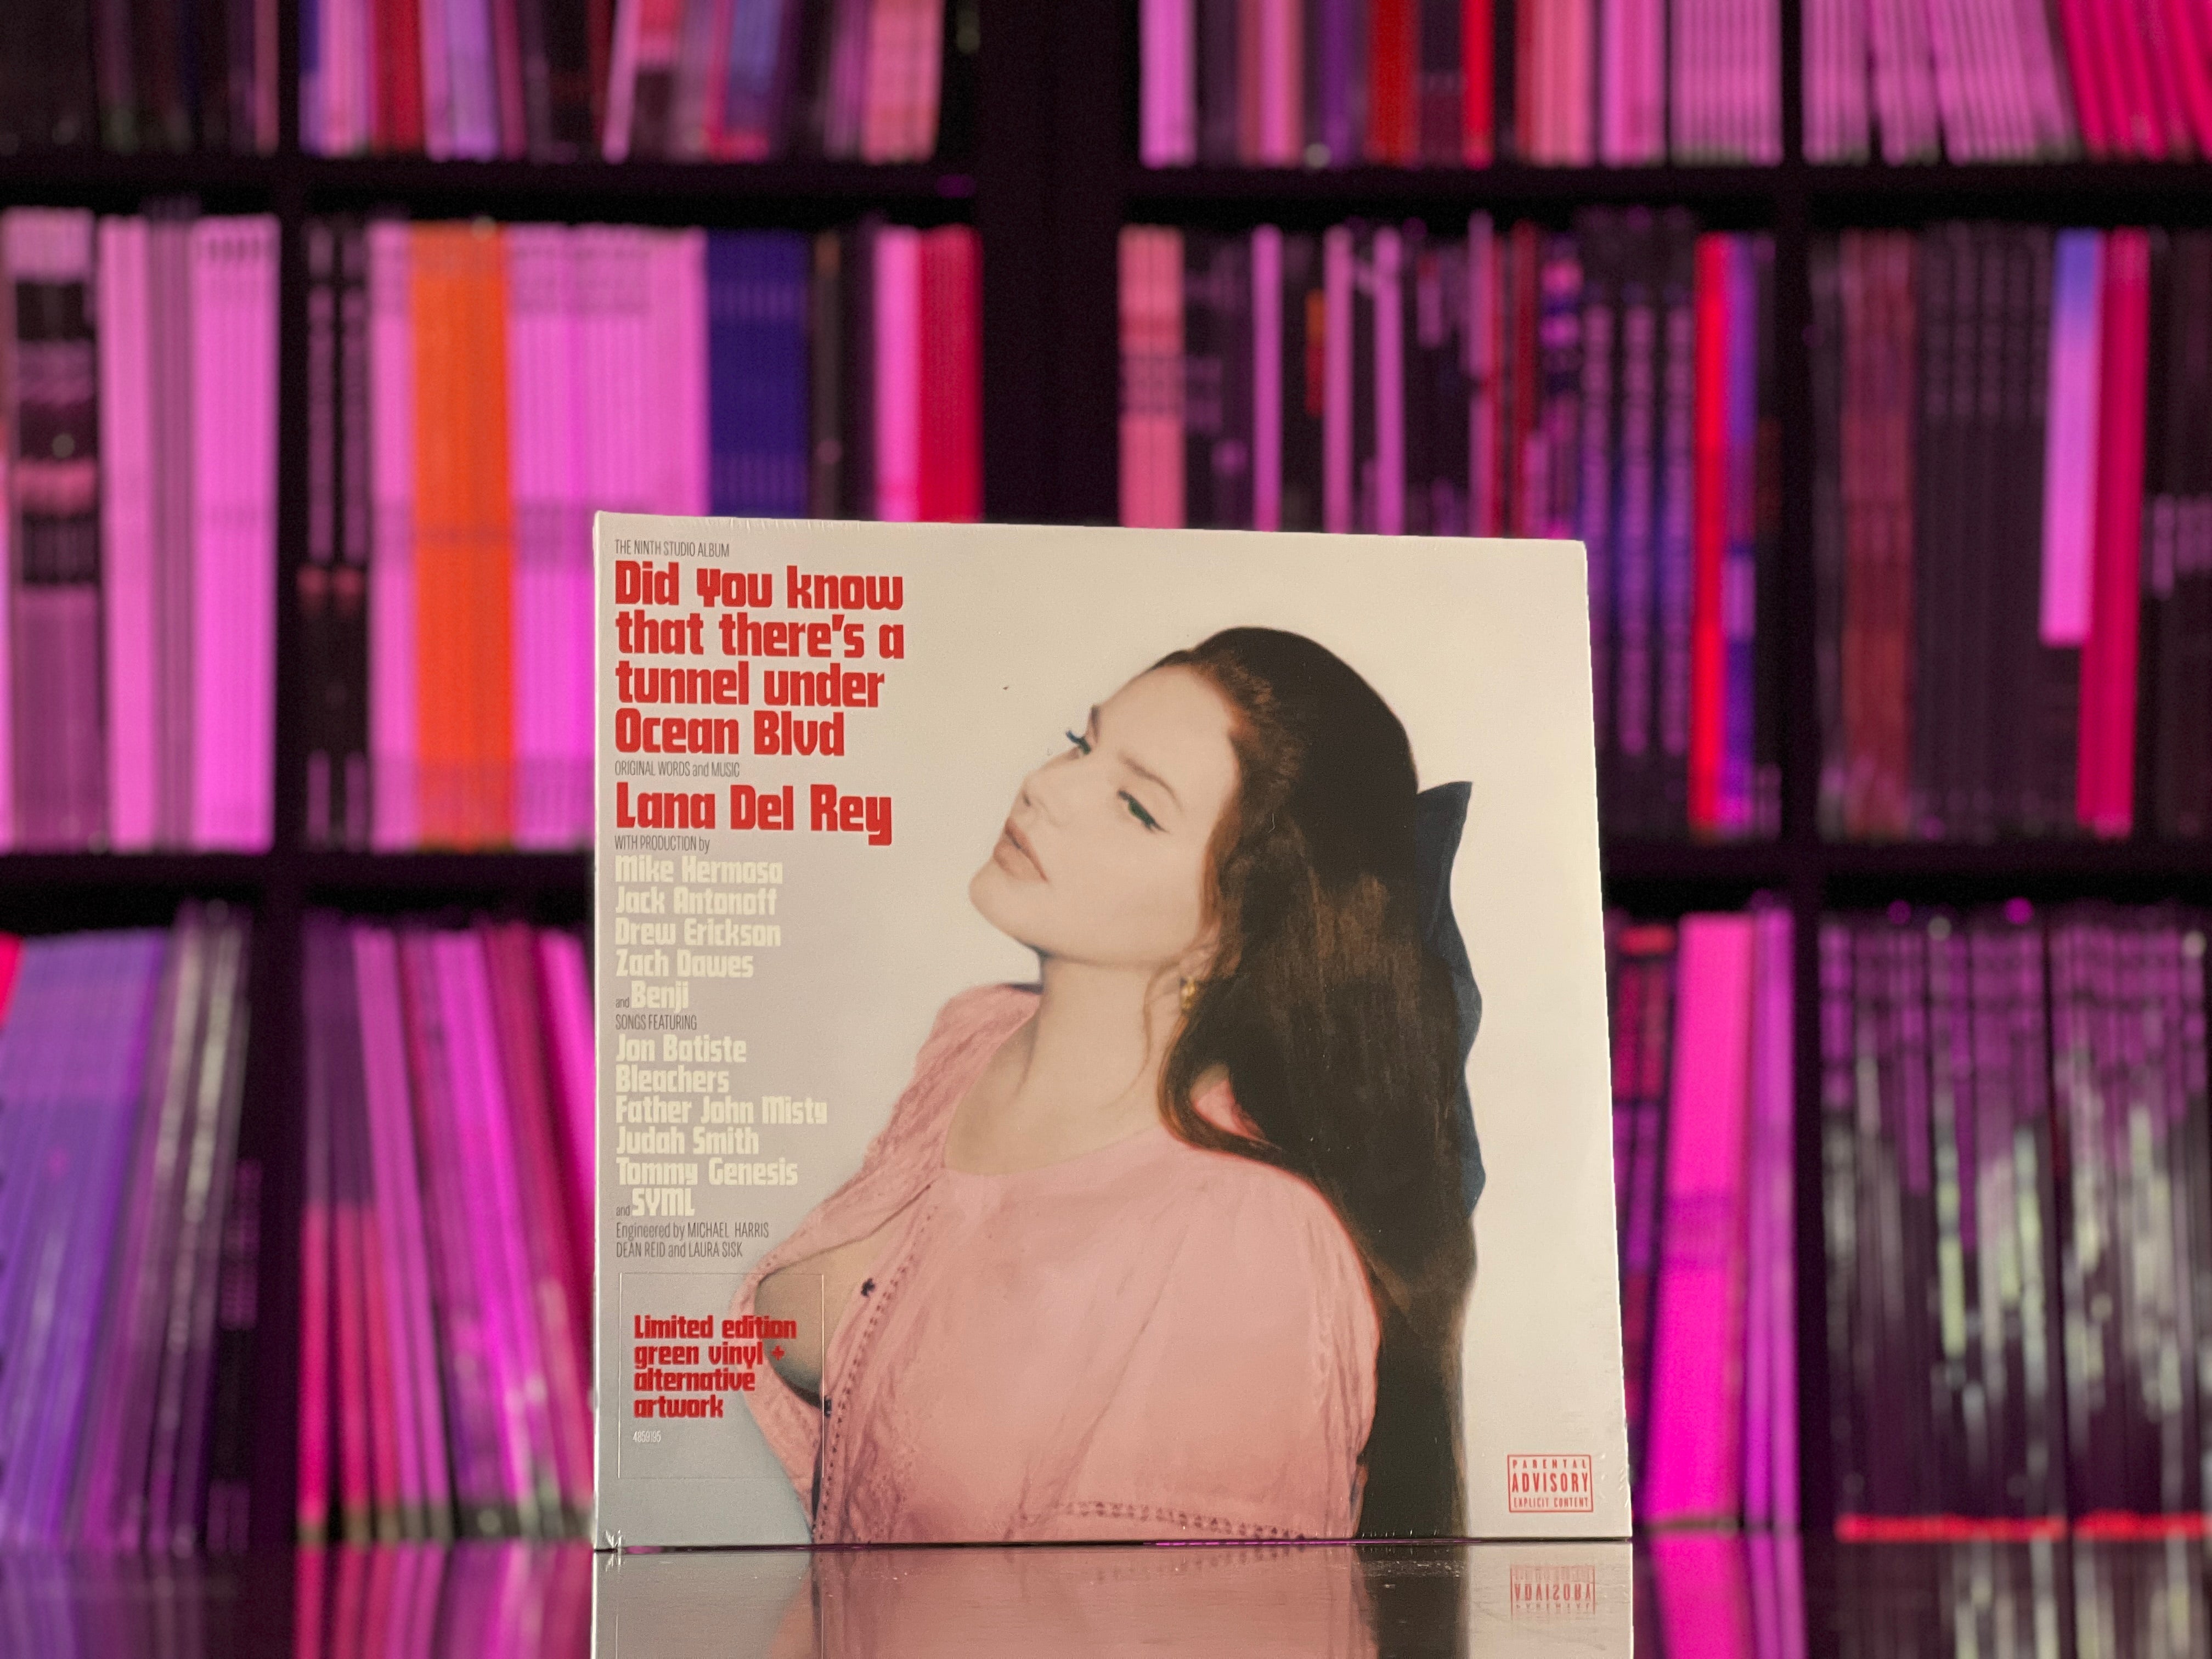 lana del rey – did you know that there's a tunnel under ocean blvd (vinyl  unboxing)